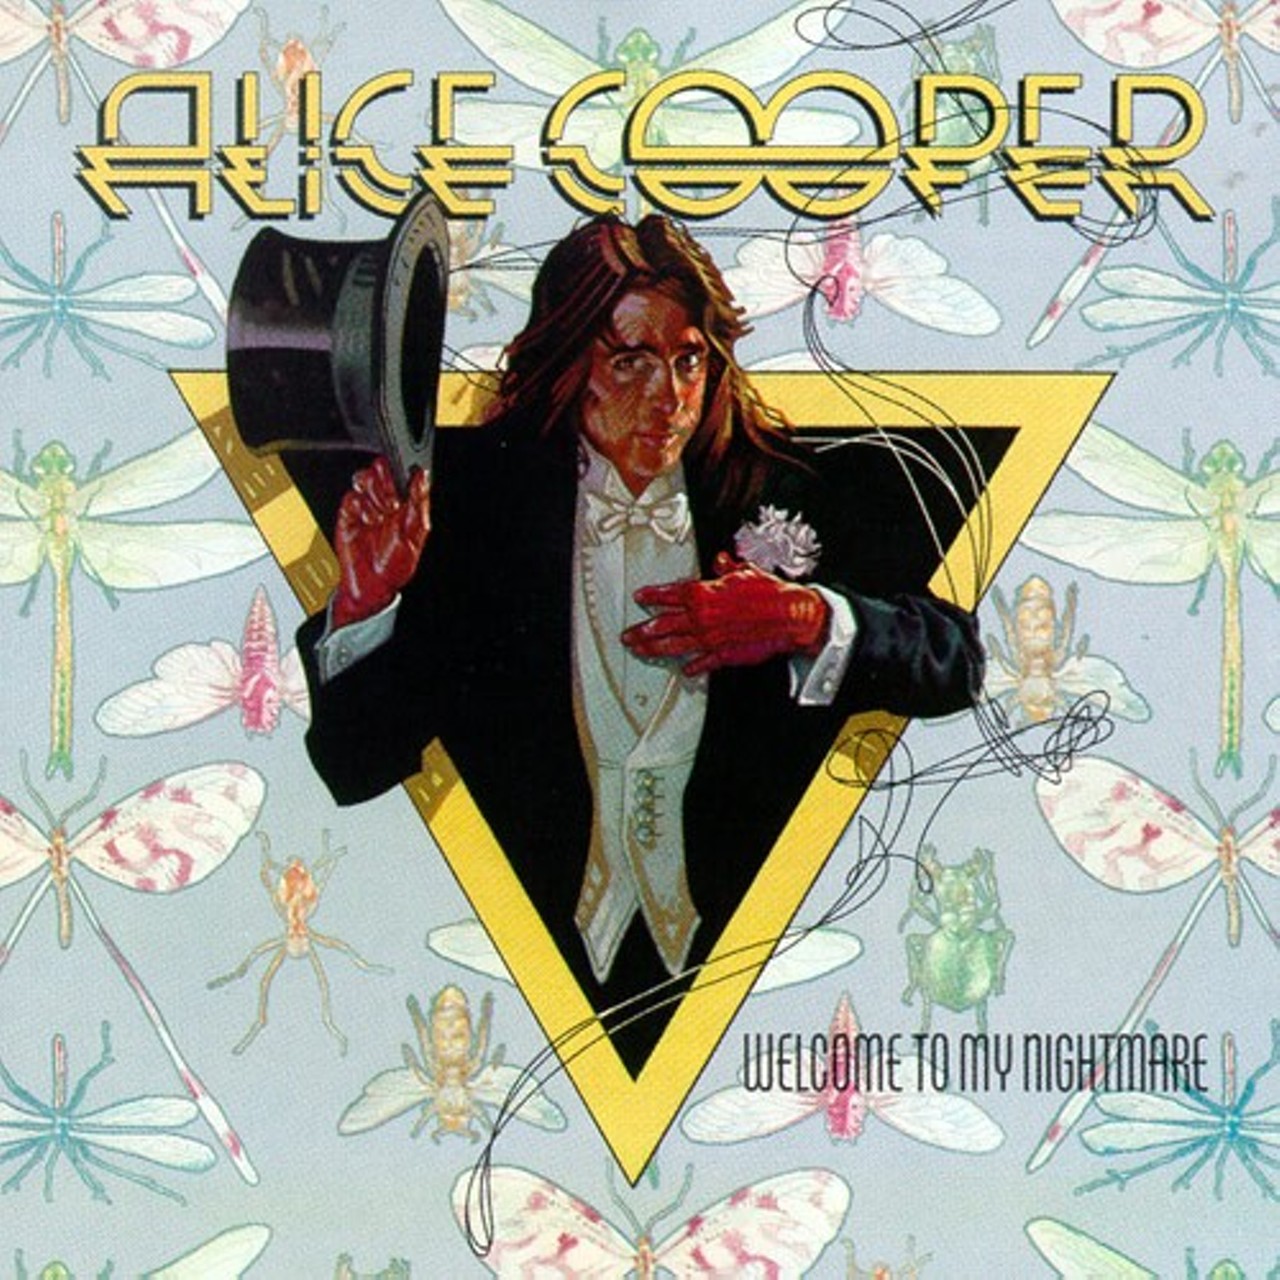 Alice Cooper
“Welcome to my Nightmare”
If we’re going to compile a list of Halloween-y, horror songs from Detroit, then Alice Cooper has to be right up there. This Coop classic is from the album of the same name, his first as a solo artist, away from the Alice Cooper Group. “We sweat and laugh and scream here, 'Cause life is just a dream here, You know inside you feel right at home here,” sings Alice, probably referring to Detroit.